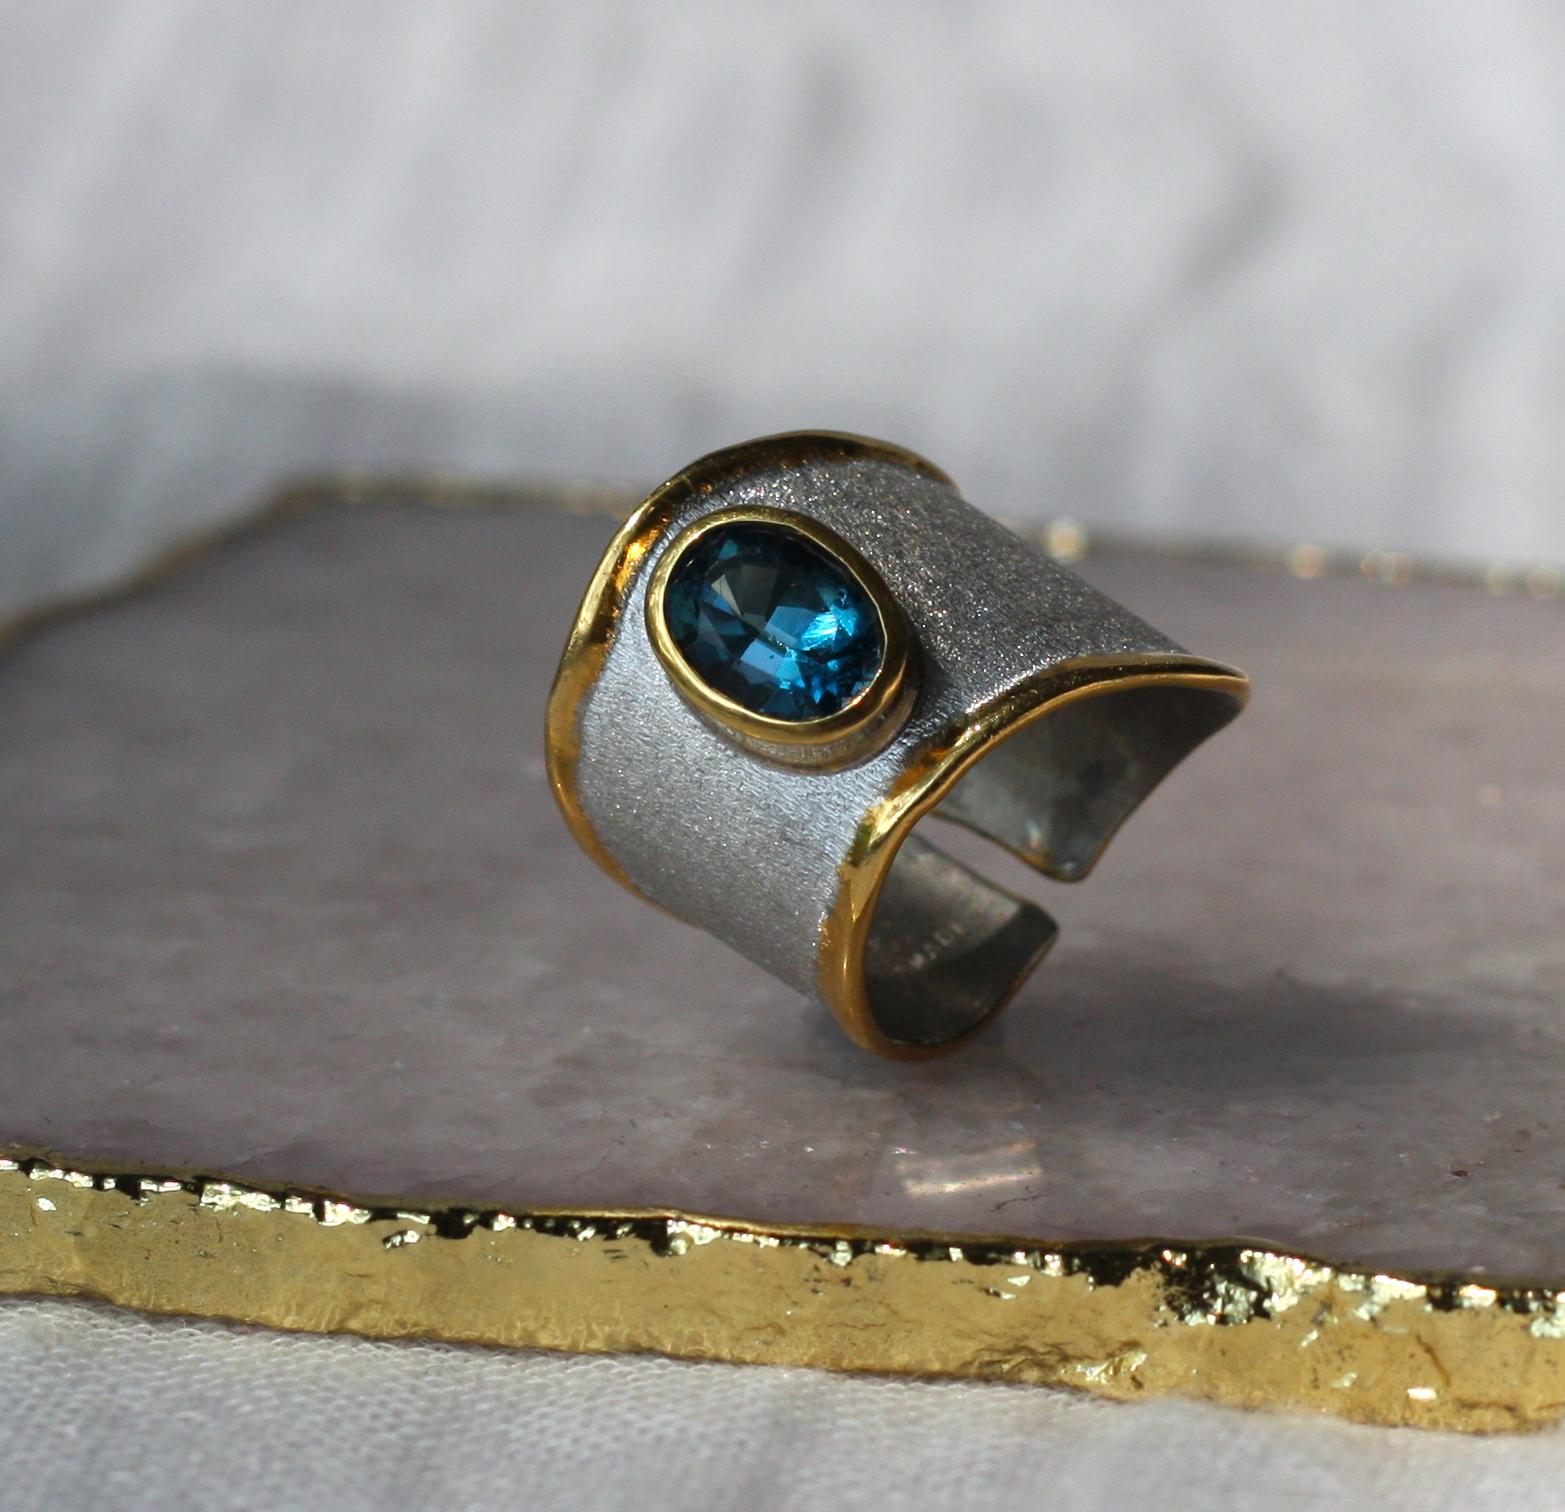 Introducing Yianni Creations Midas Collection handmade artisan ring from fine silver 950 purity plated with palladium to resist the elements. Liquid edges are decorated with an overlay of 24 Karat yellow gold contrasting with a brushed texture of